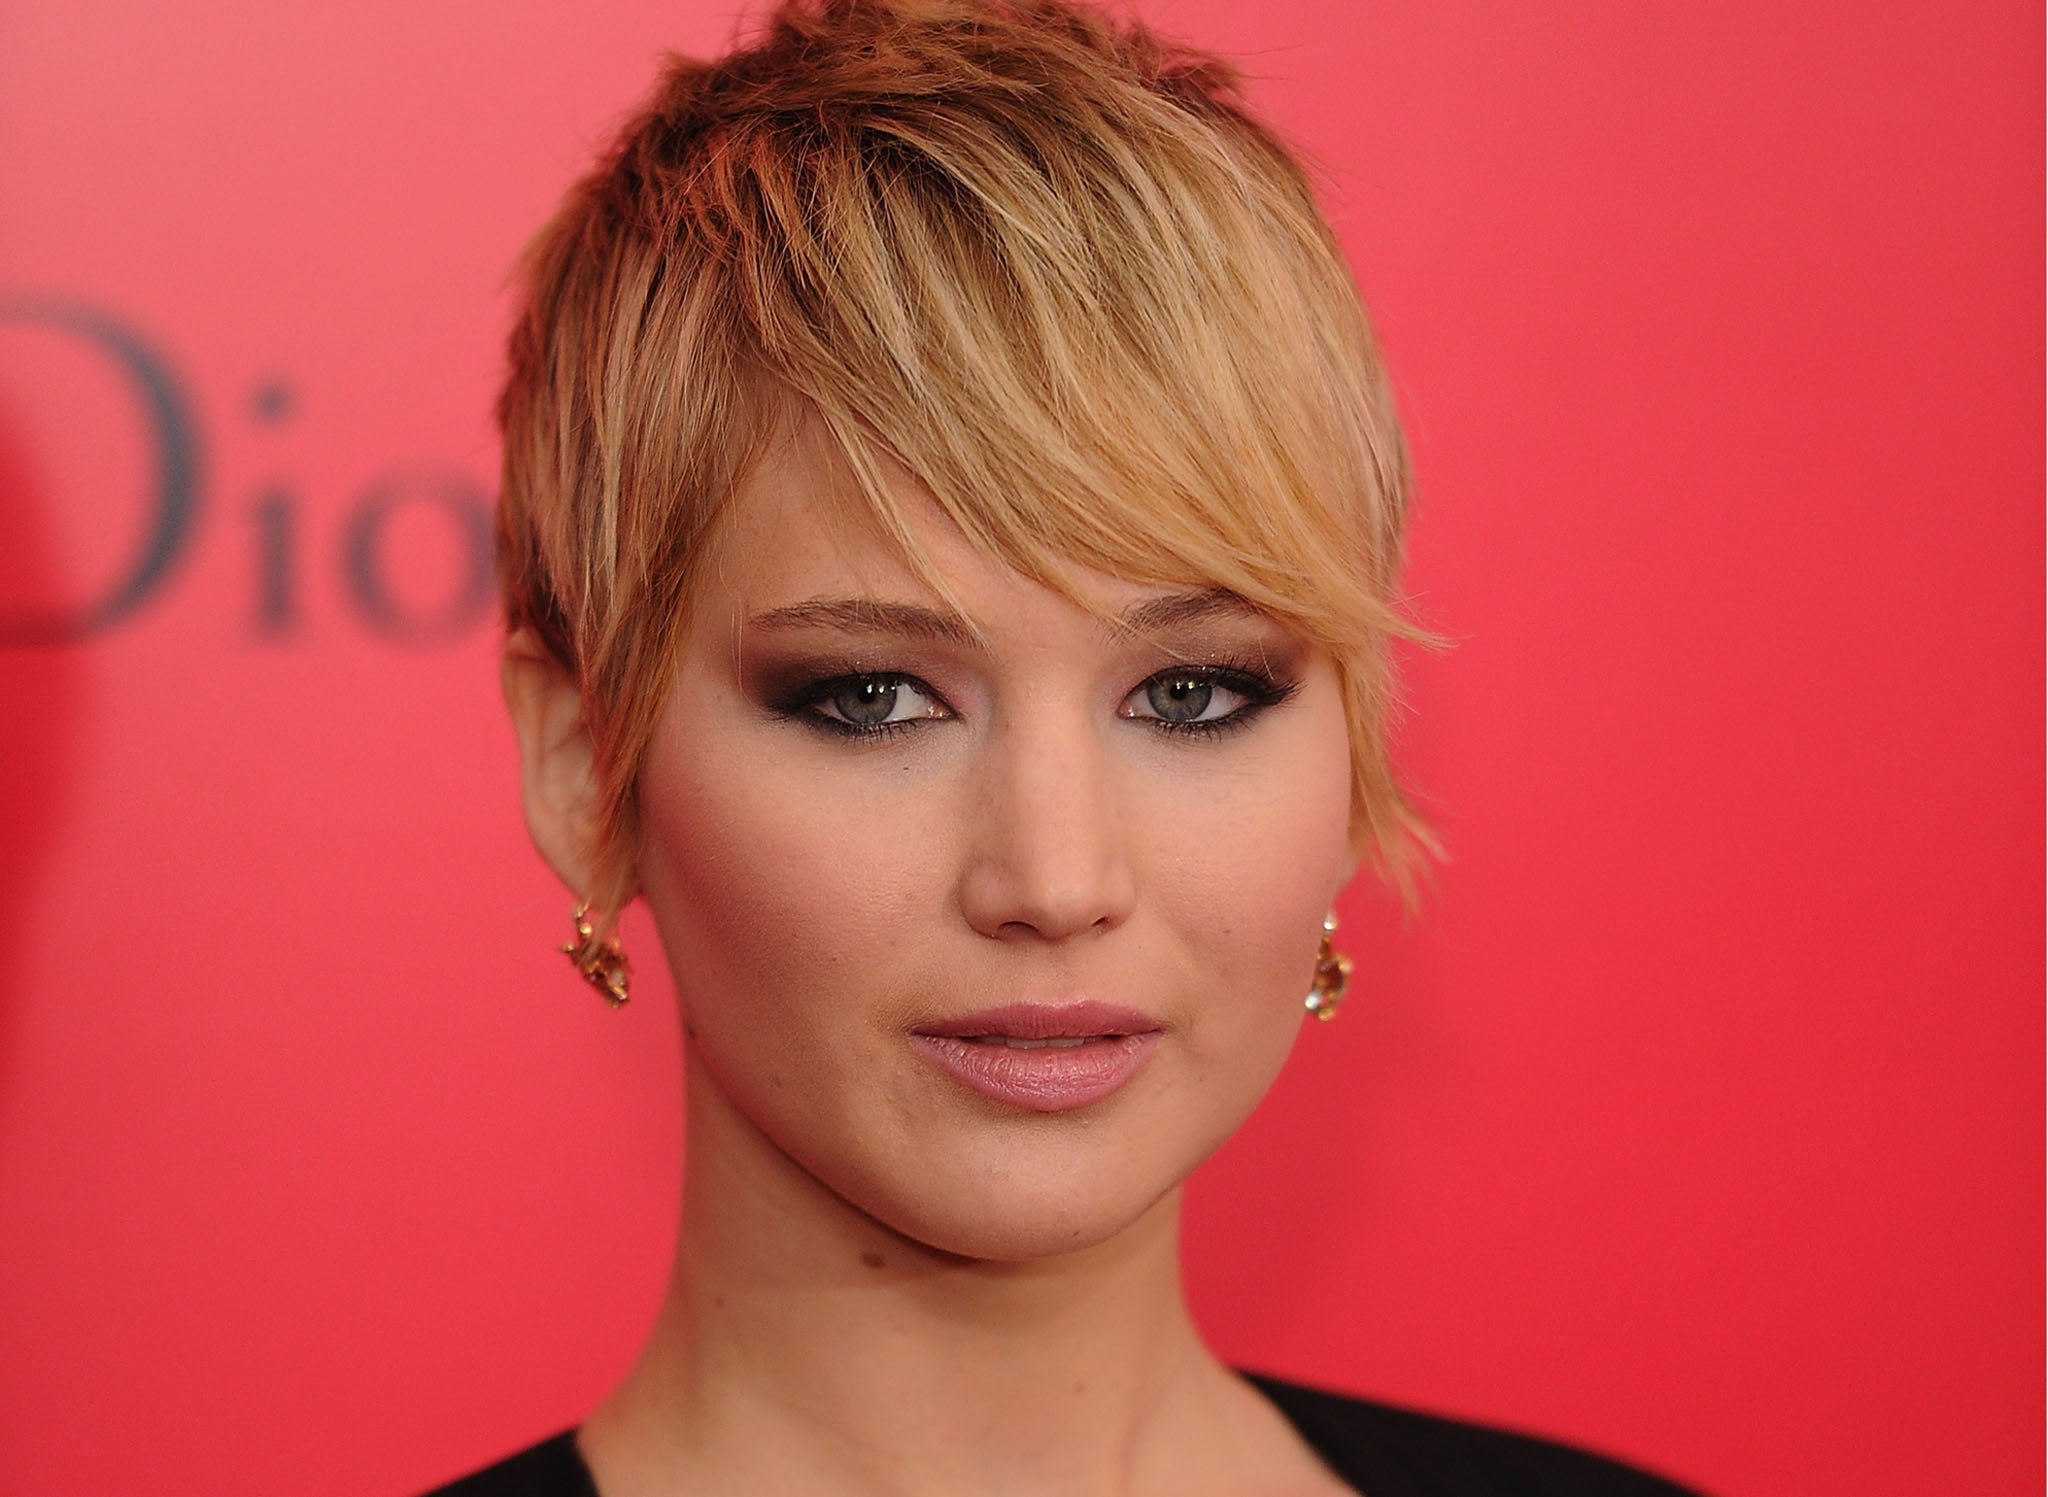 Porn Sex Jennifer Lawrence - Jennifer Lawrence nude photos leak: FBI and Apple to investigate hacking of  iCloud | The Independent | The Independent